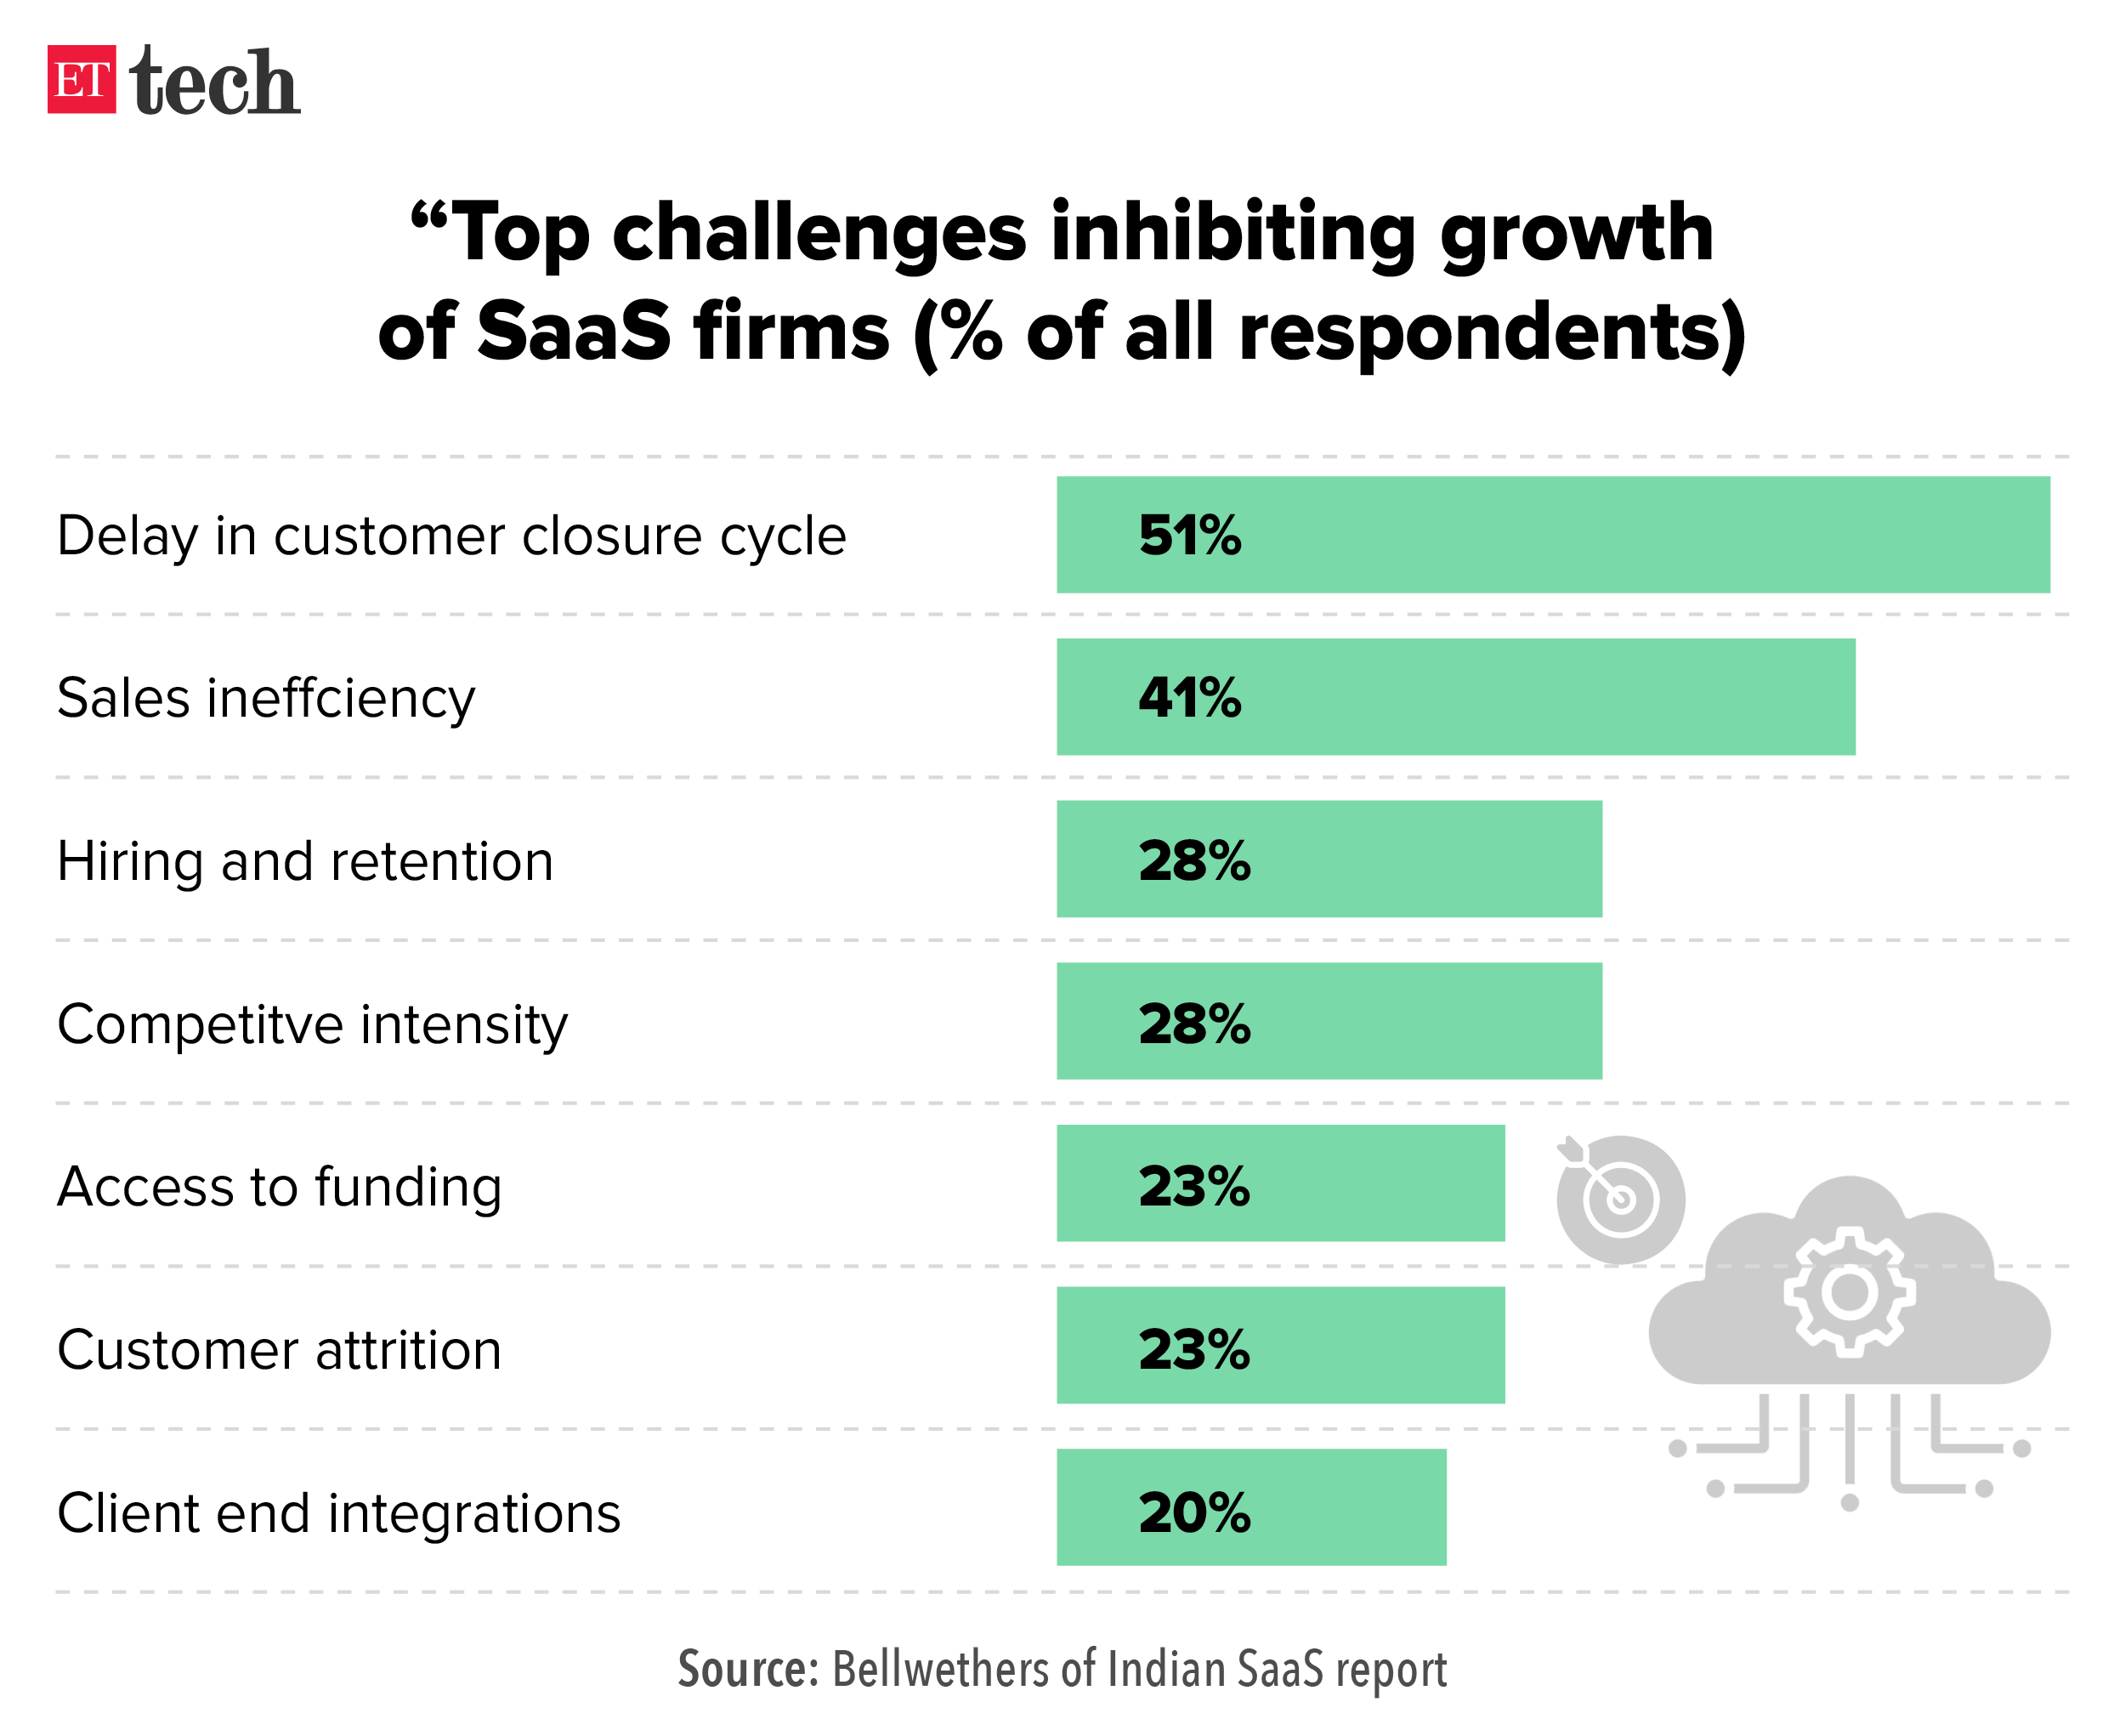 Top challenges inhibiting growth of SaaS firms